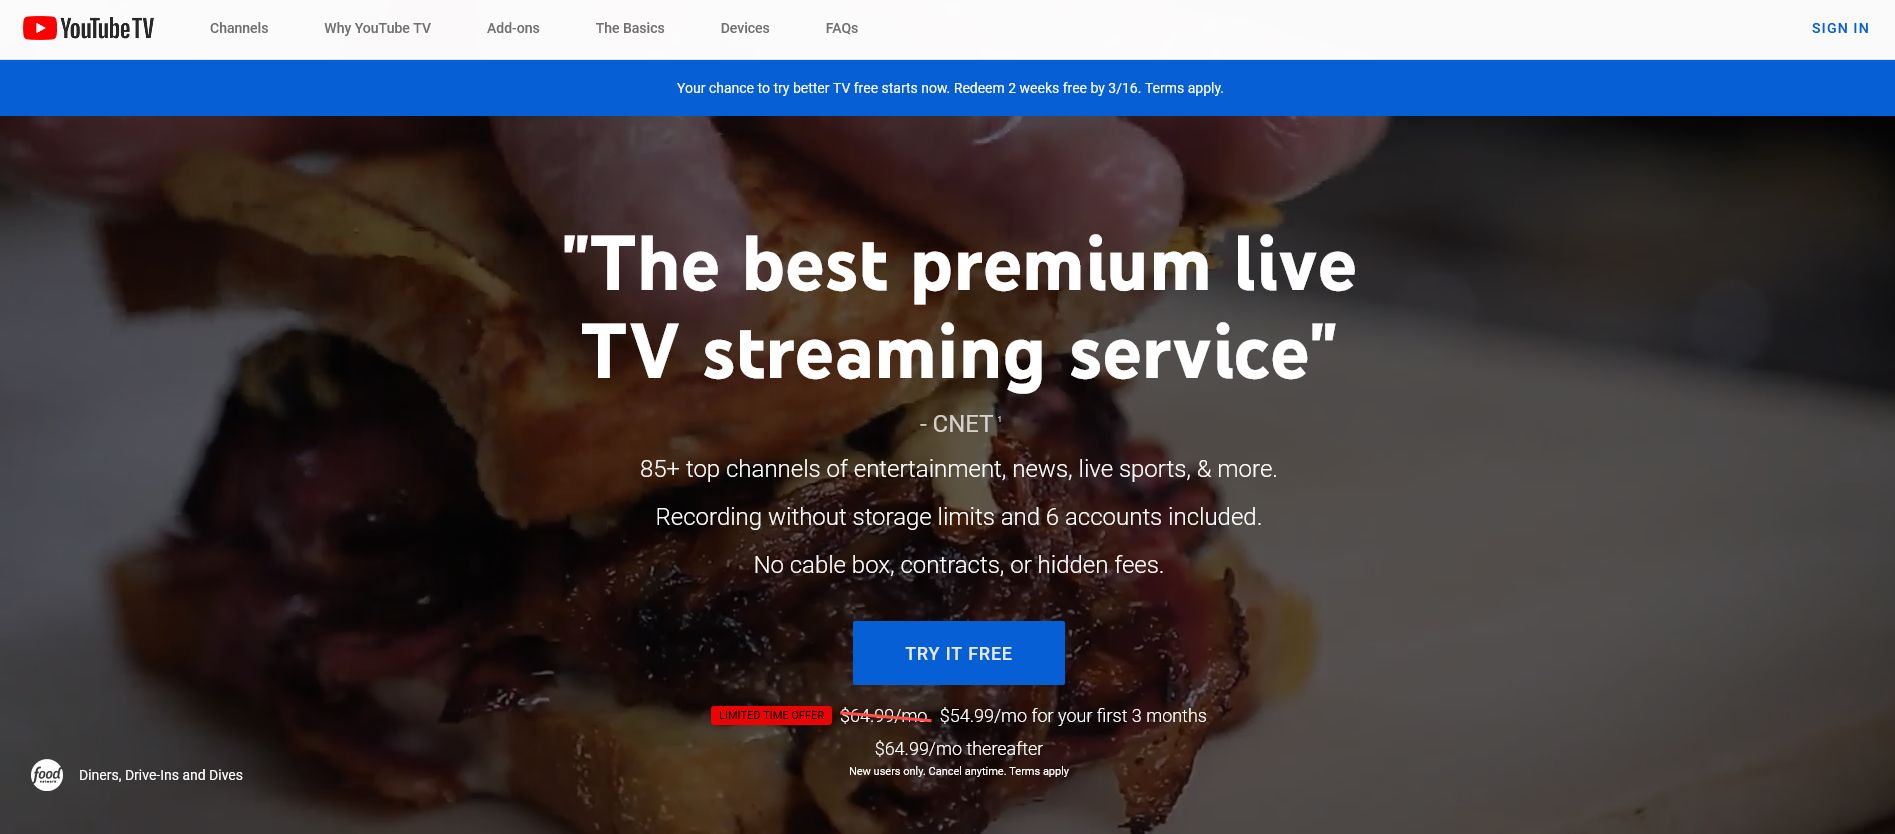 How Much To Add Showtime To Youtube Tv How to try YouTube TV for free and how much does it usually cost - usn news